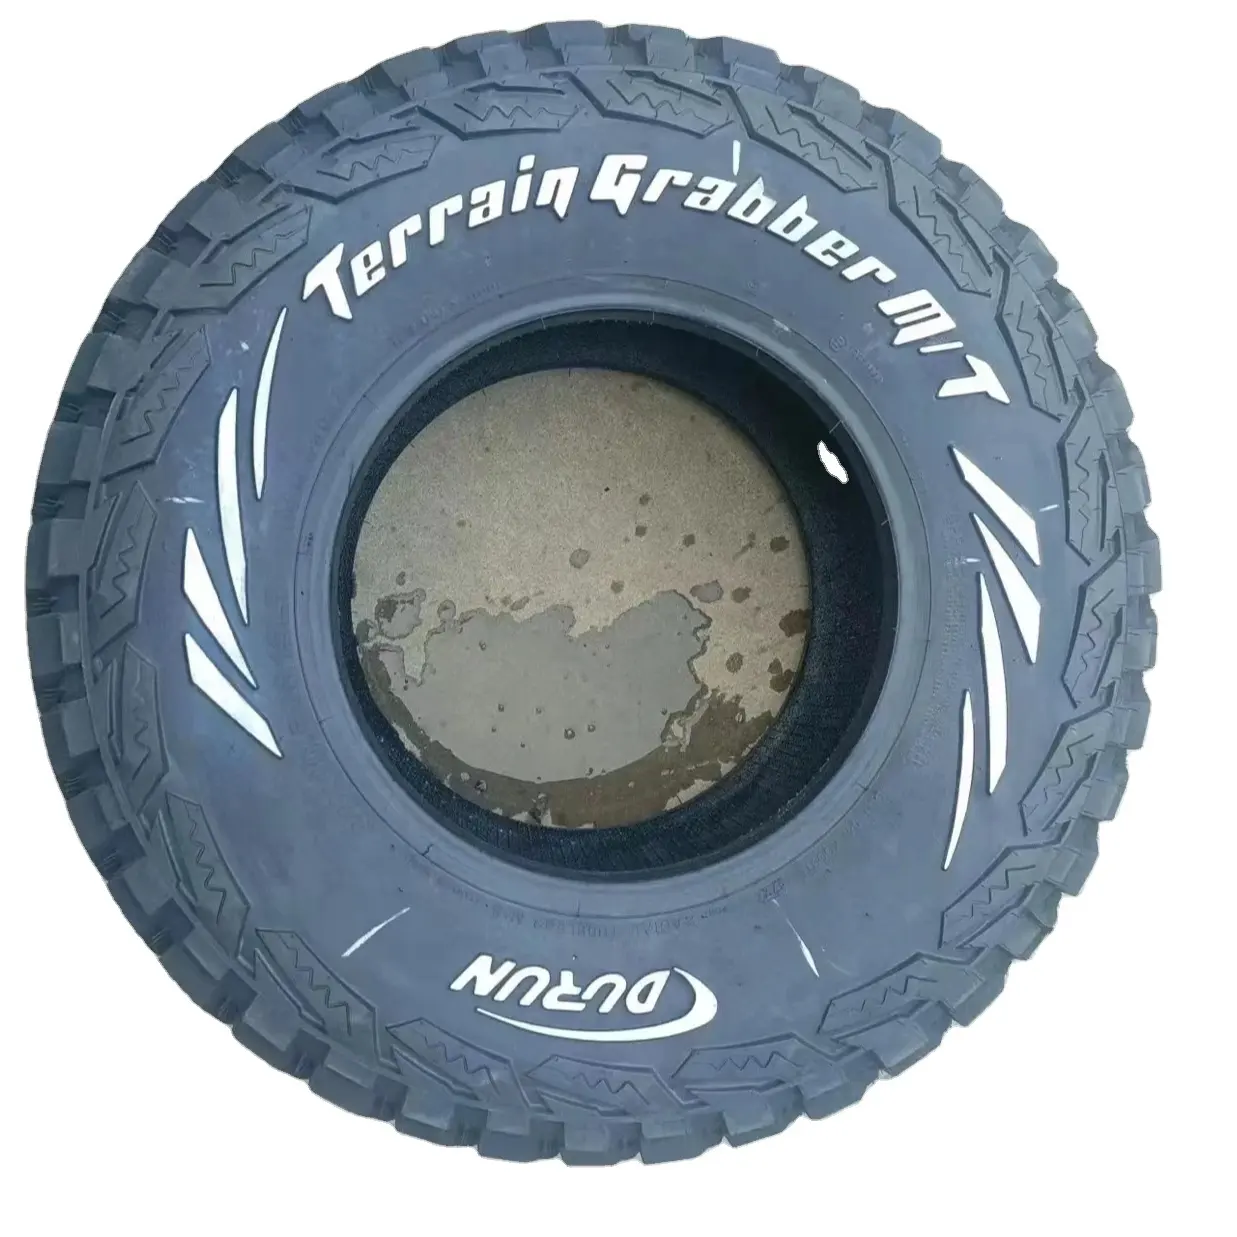 265/65R17LT 120/117Q 10PR 4X4 SUV mud and all terrain tire snow flake rated AT MT off road tire 265/65R17